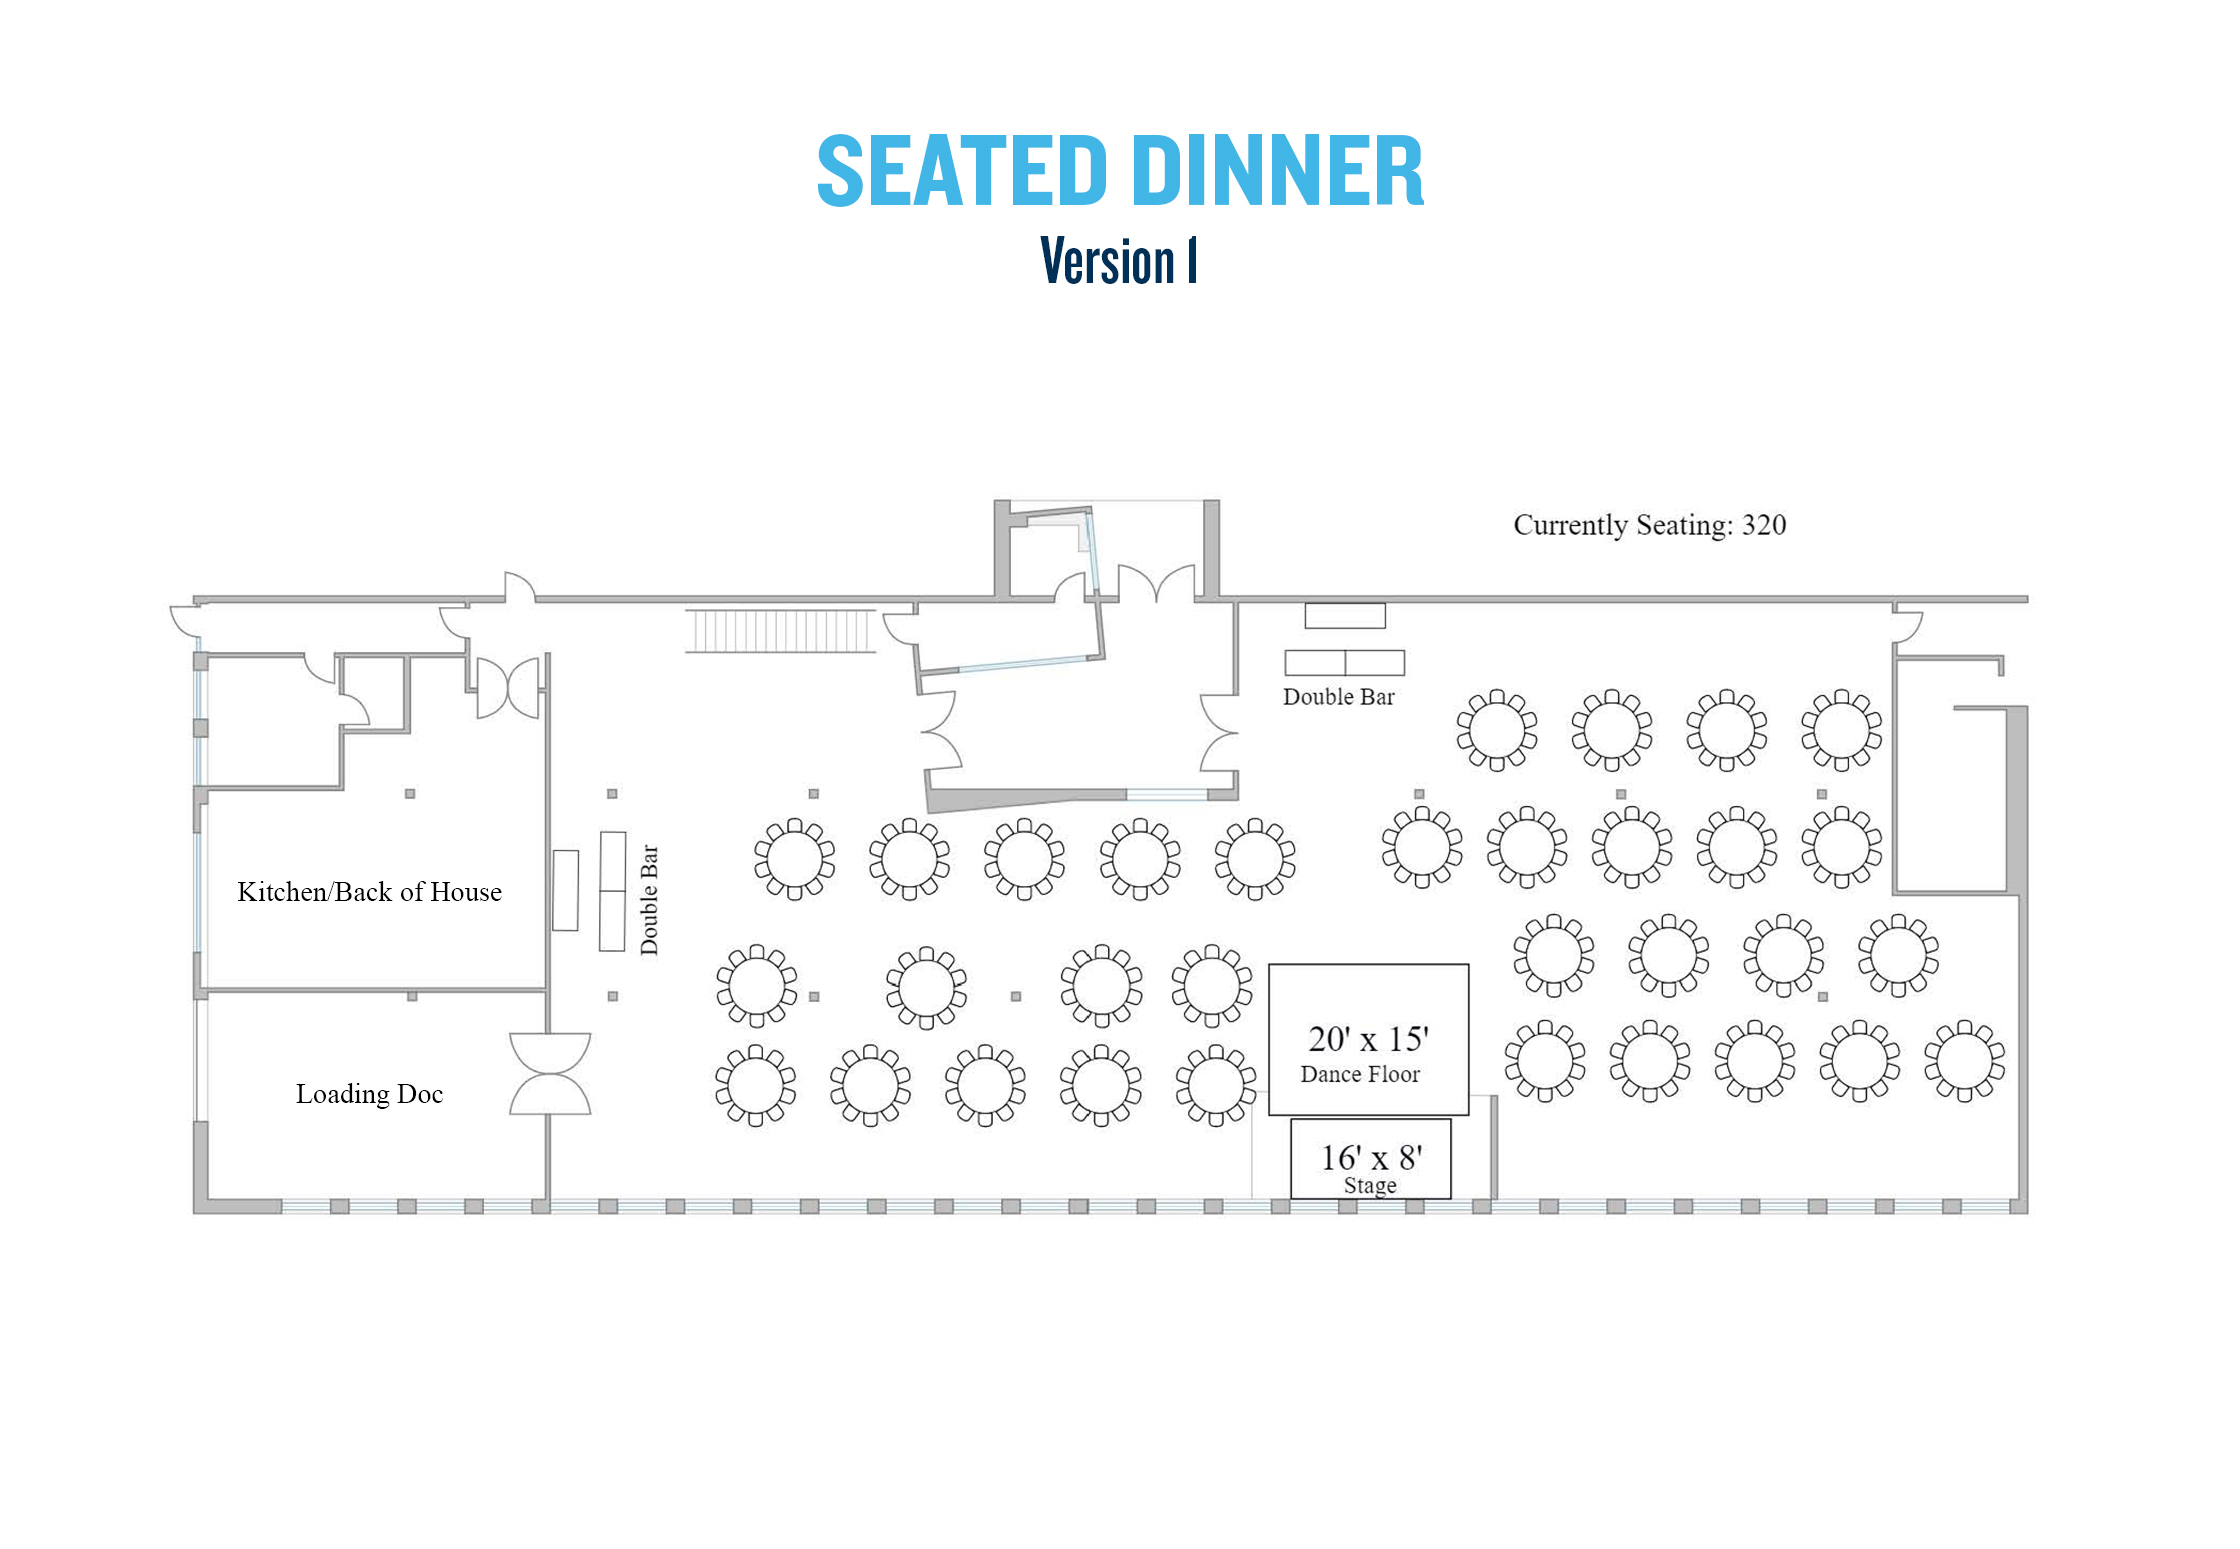 This layout can seat 320 guests, includes two separate double bars, as well as a stage and dance floor.